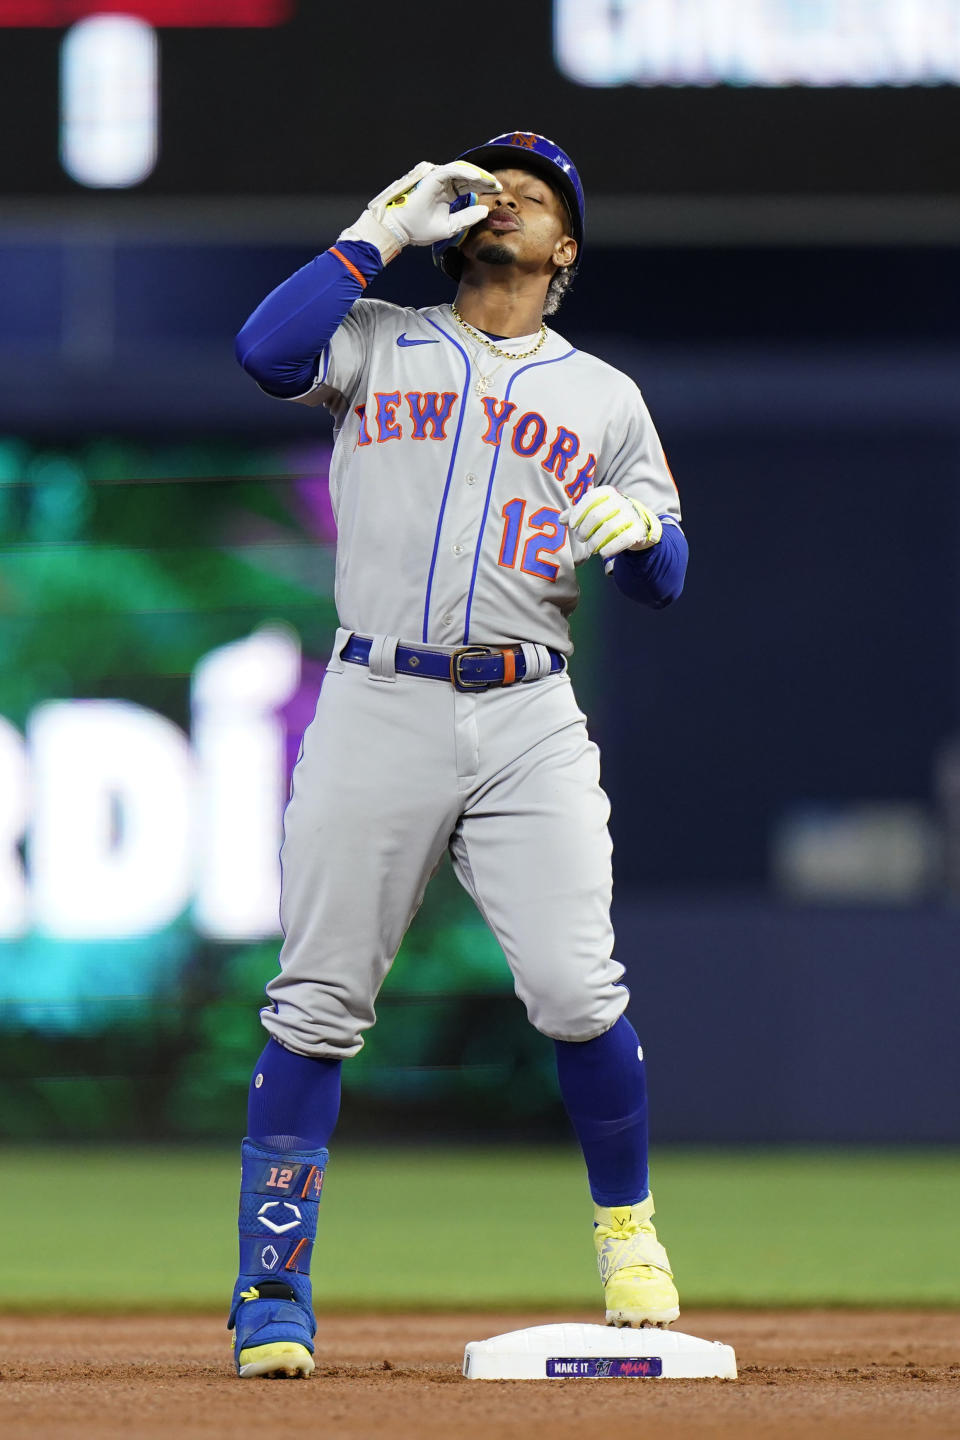 New York Mets' Francisco Lindor celebrates after hitting a double during the first inning of a baseball game against the Miami Marlins, Sunday, July 31, 2022, in Miami. (AP Photo/Wilfredo Lee)